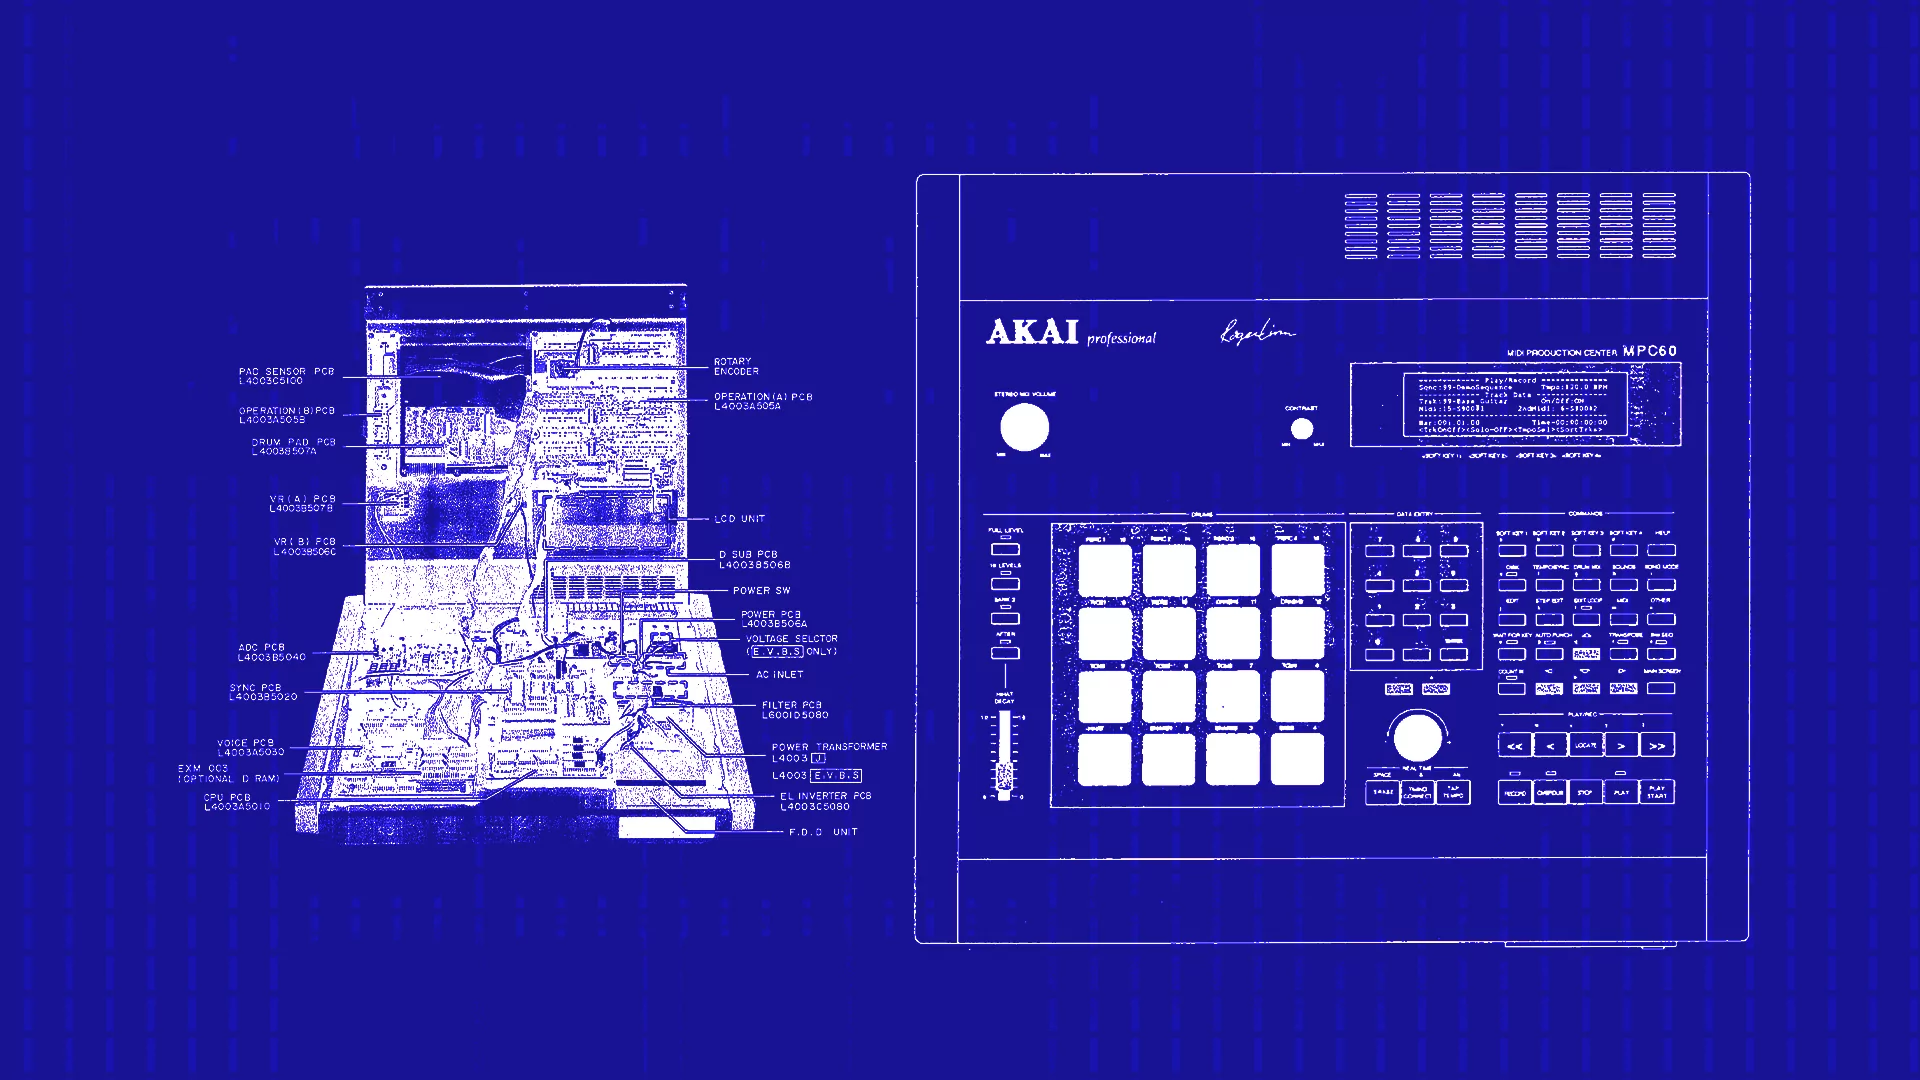 Blue graphic featuring sketches of computerised technology